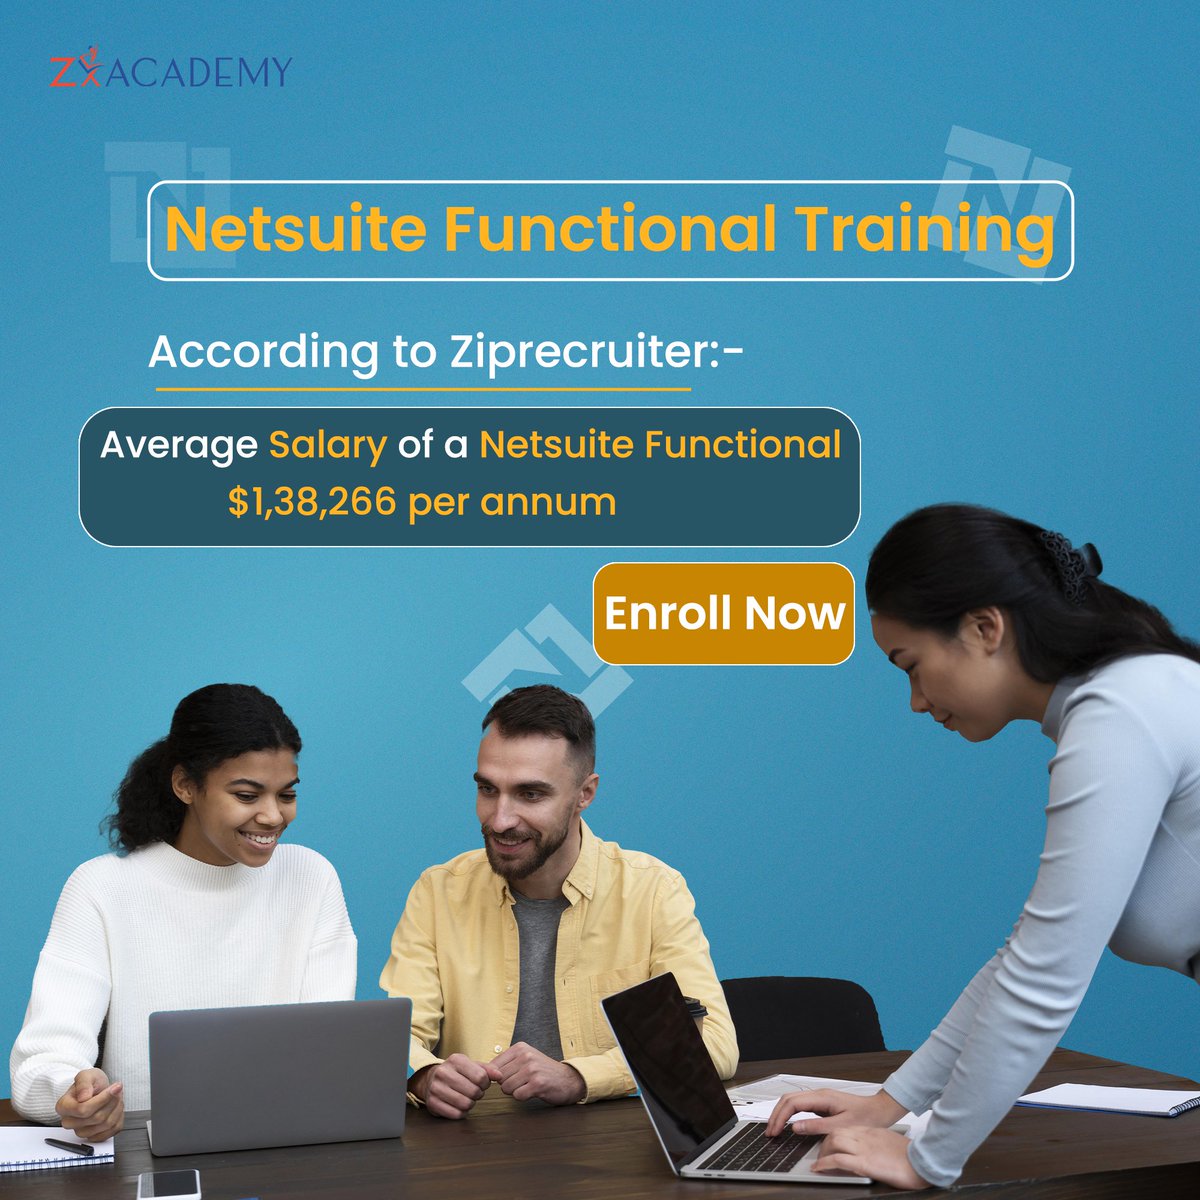 📷 Start your career with Netsuite Functional Training with Zx Academy! 📷 Ready to take your Netsuite skills to the next level? #netsuitefunctionaltraining #zxacademy #netsuitetraining #cloud #business #training #onlinetraining #education #onlinelearning #onlinecertification